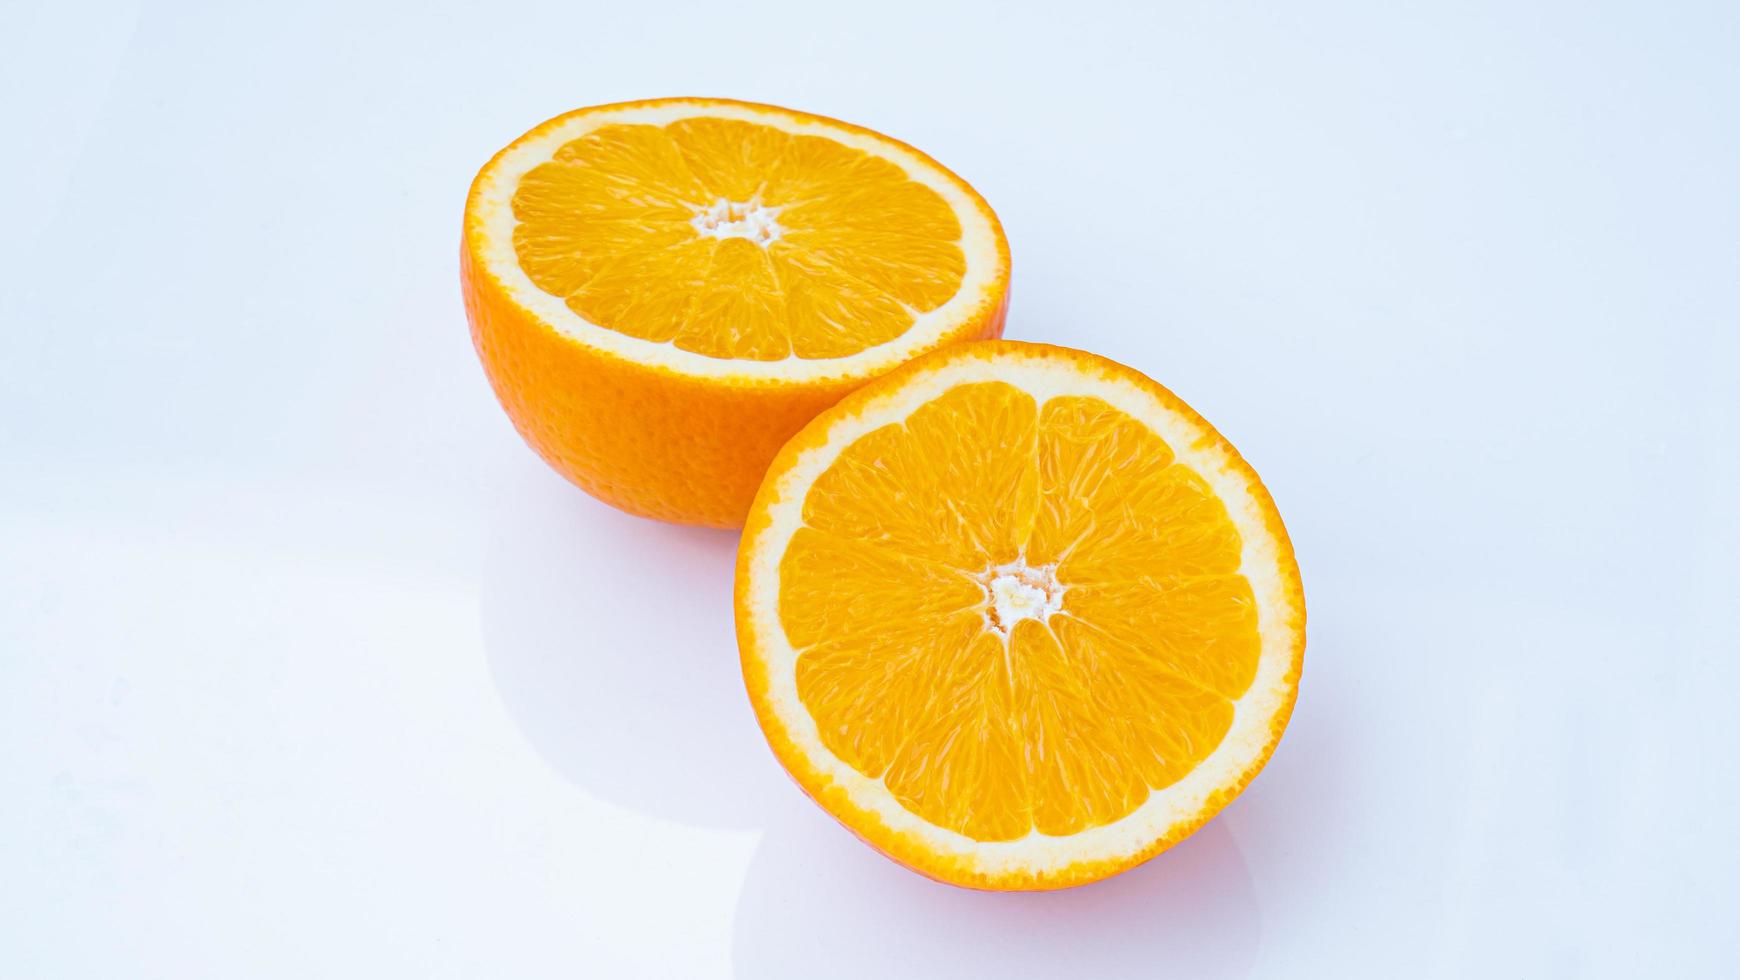 Top view orange slice, isolated on white background full depth of field photo